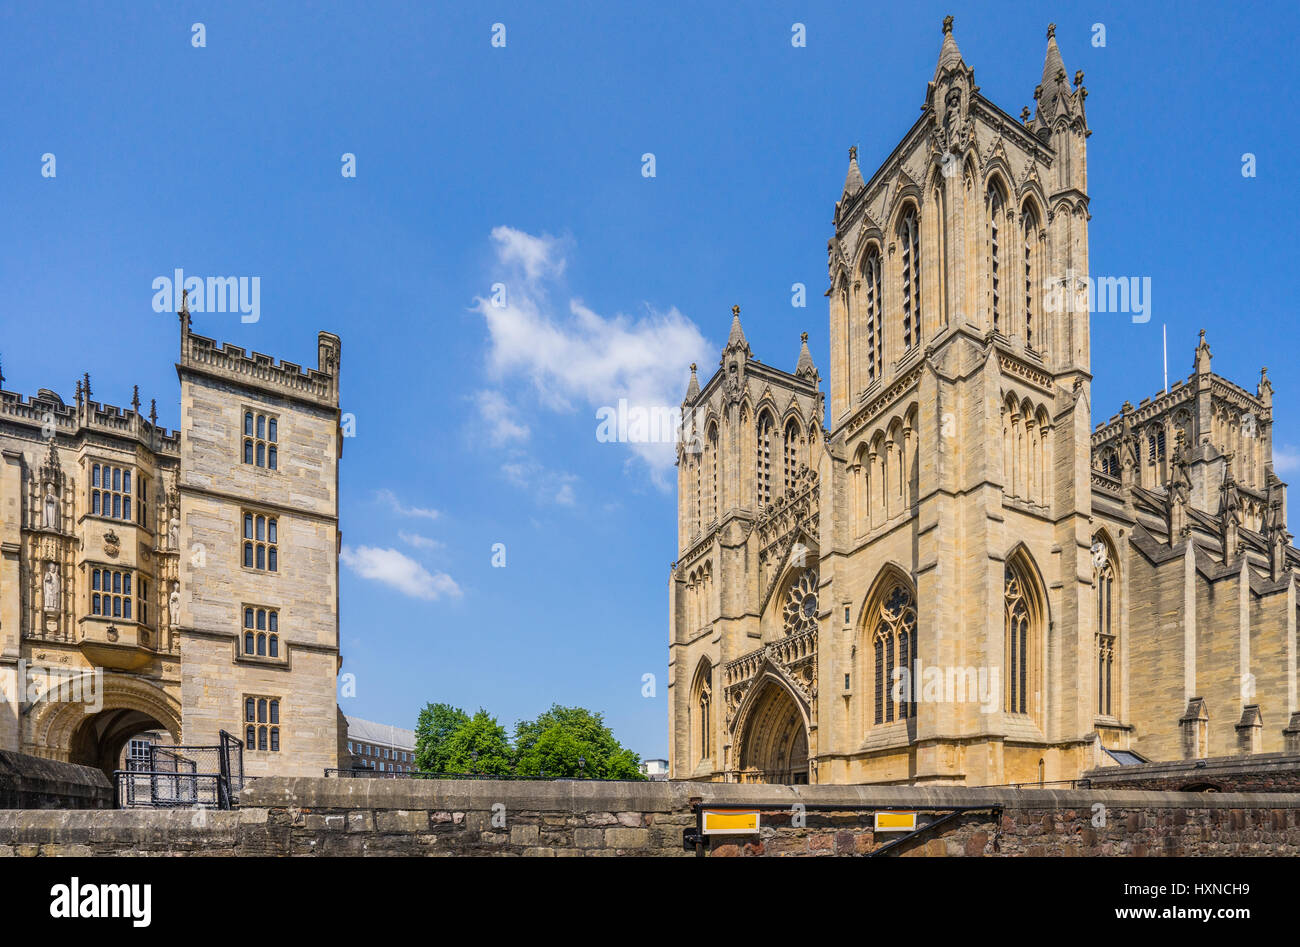 United Kingdom, South West England, Bristol, view of Bristol Cathedral and the Great Gatehouse Stock Photo